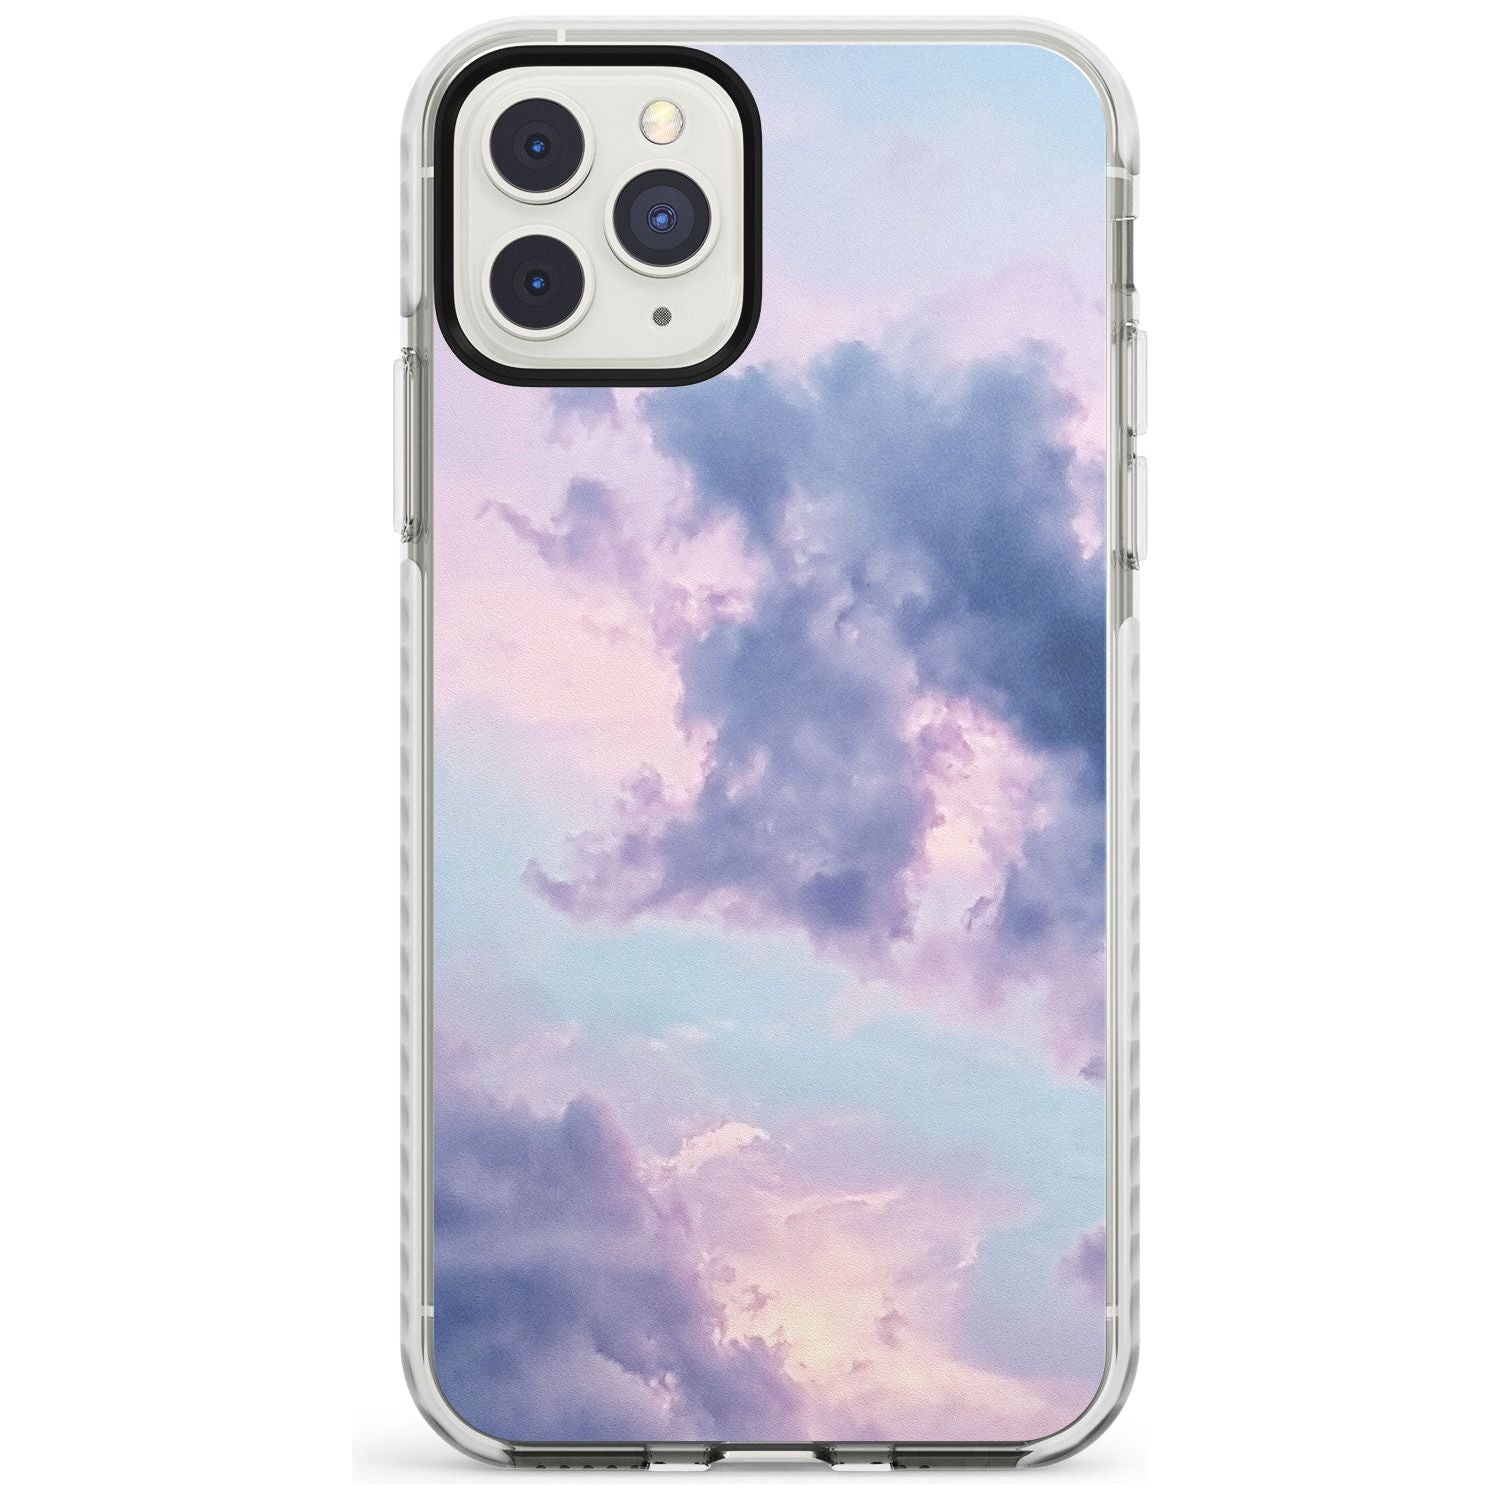 Purple Clouds Photograph Impact Phone Case for iPhone 11 Pro Max